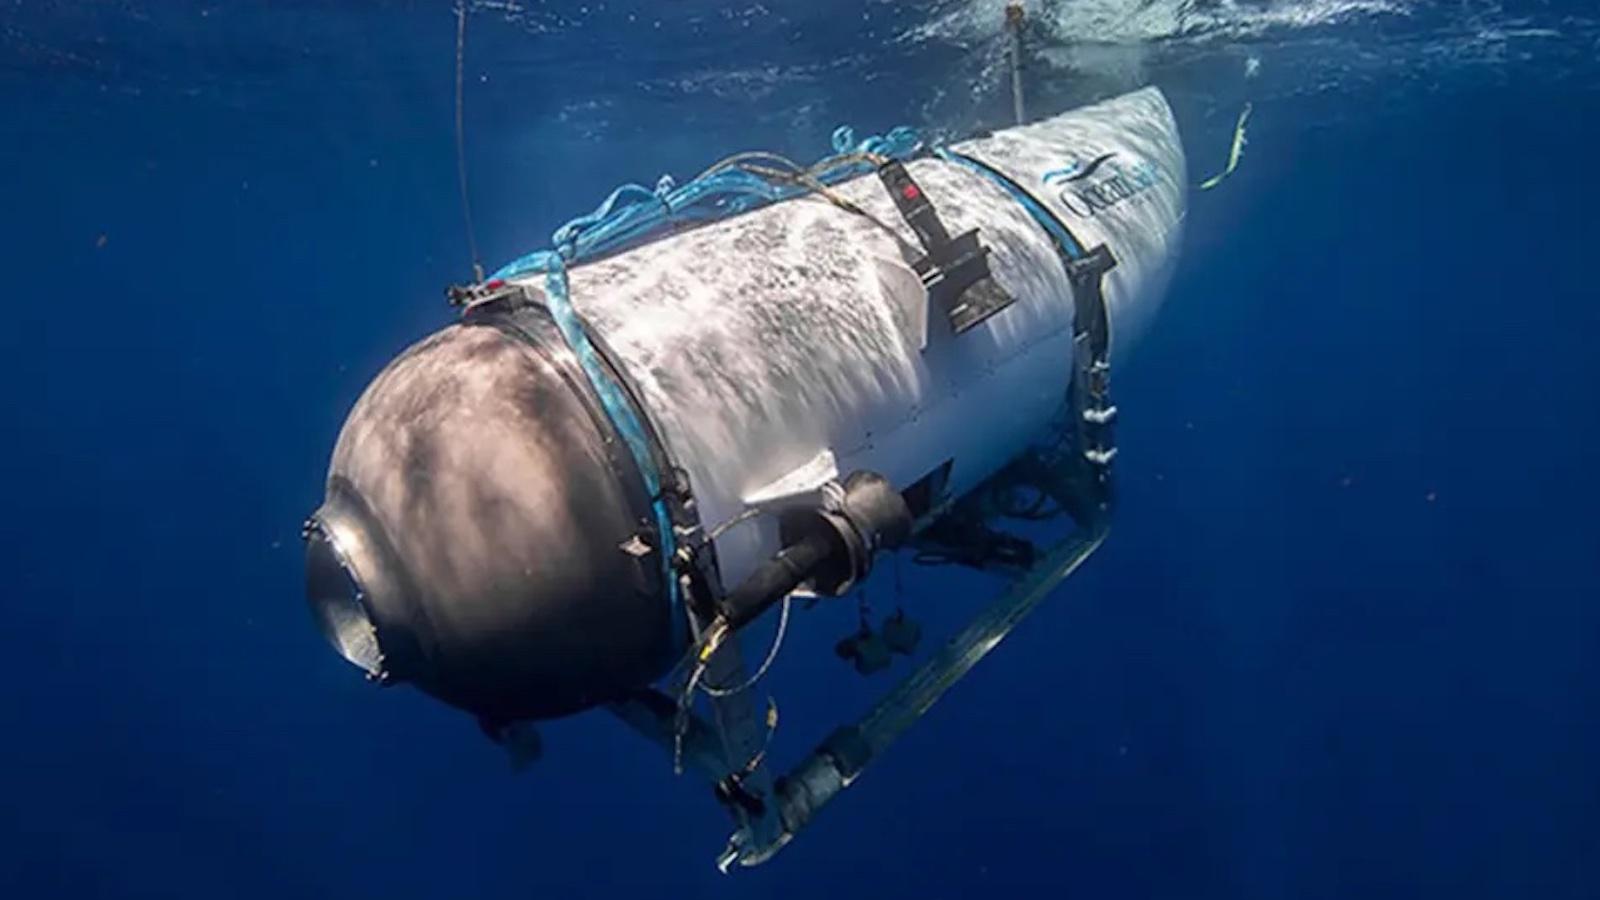 Still of the OceanGate submersible